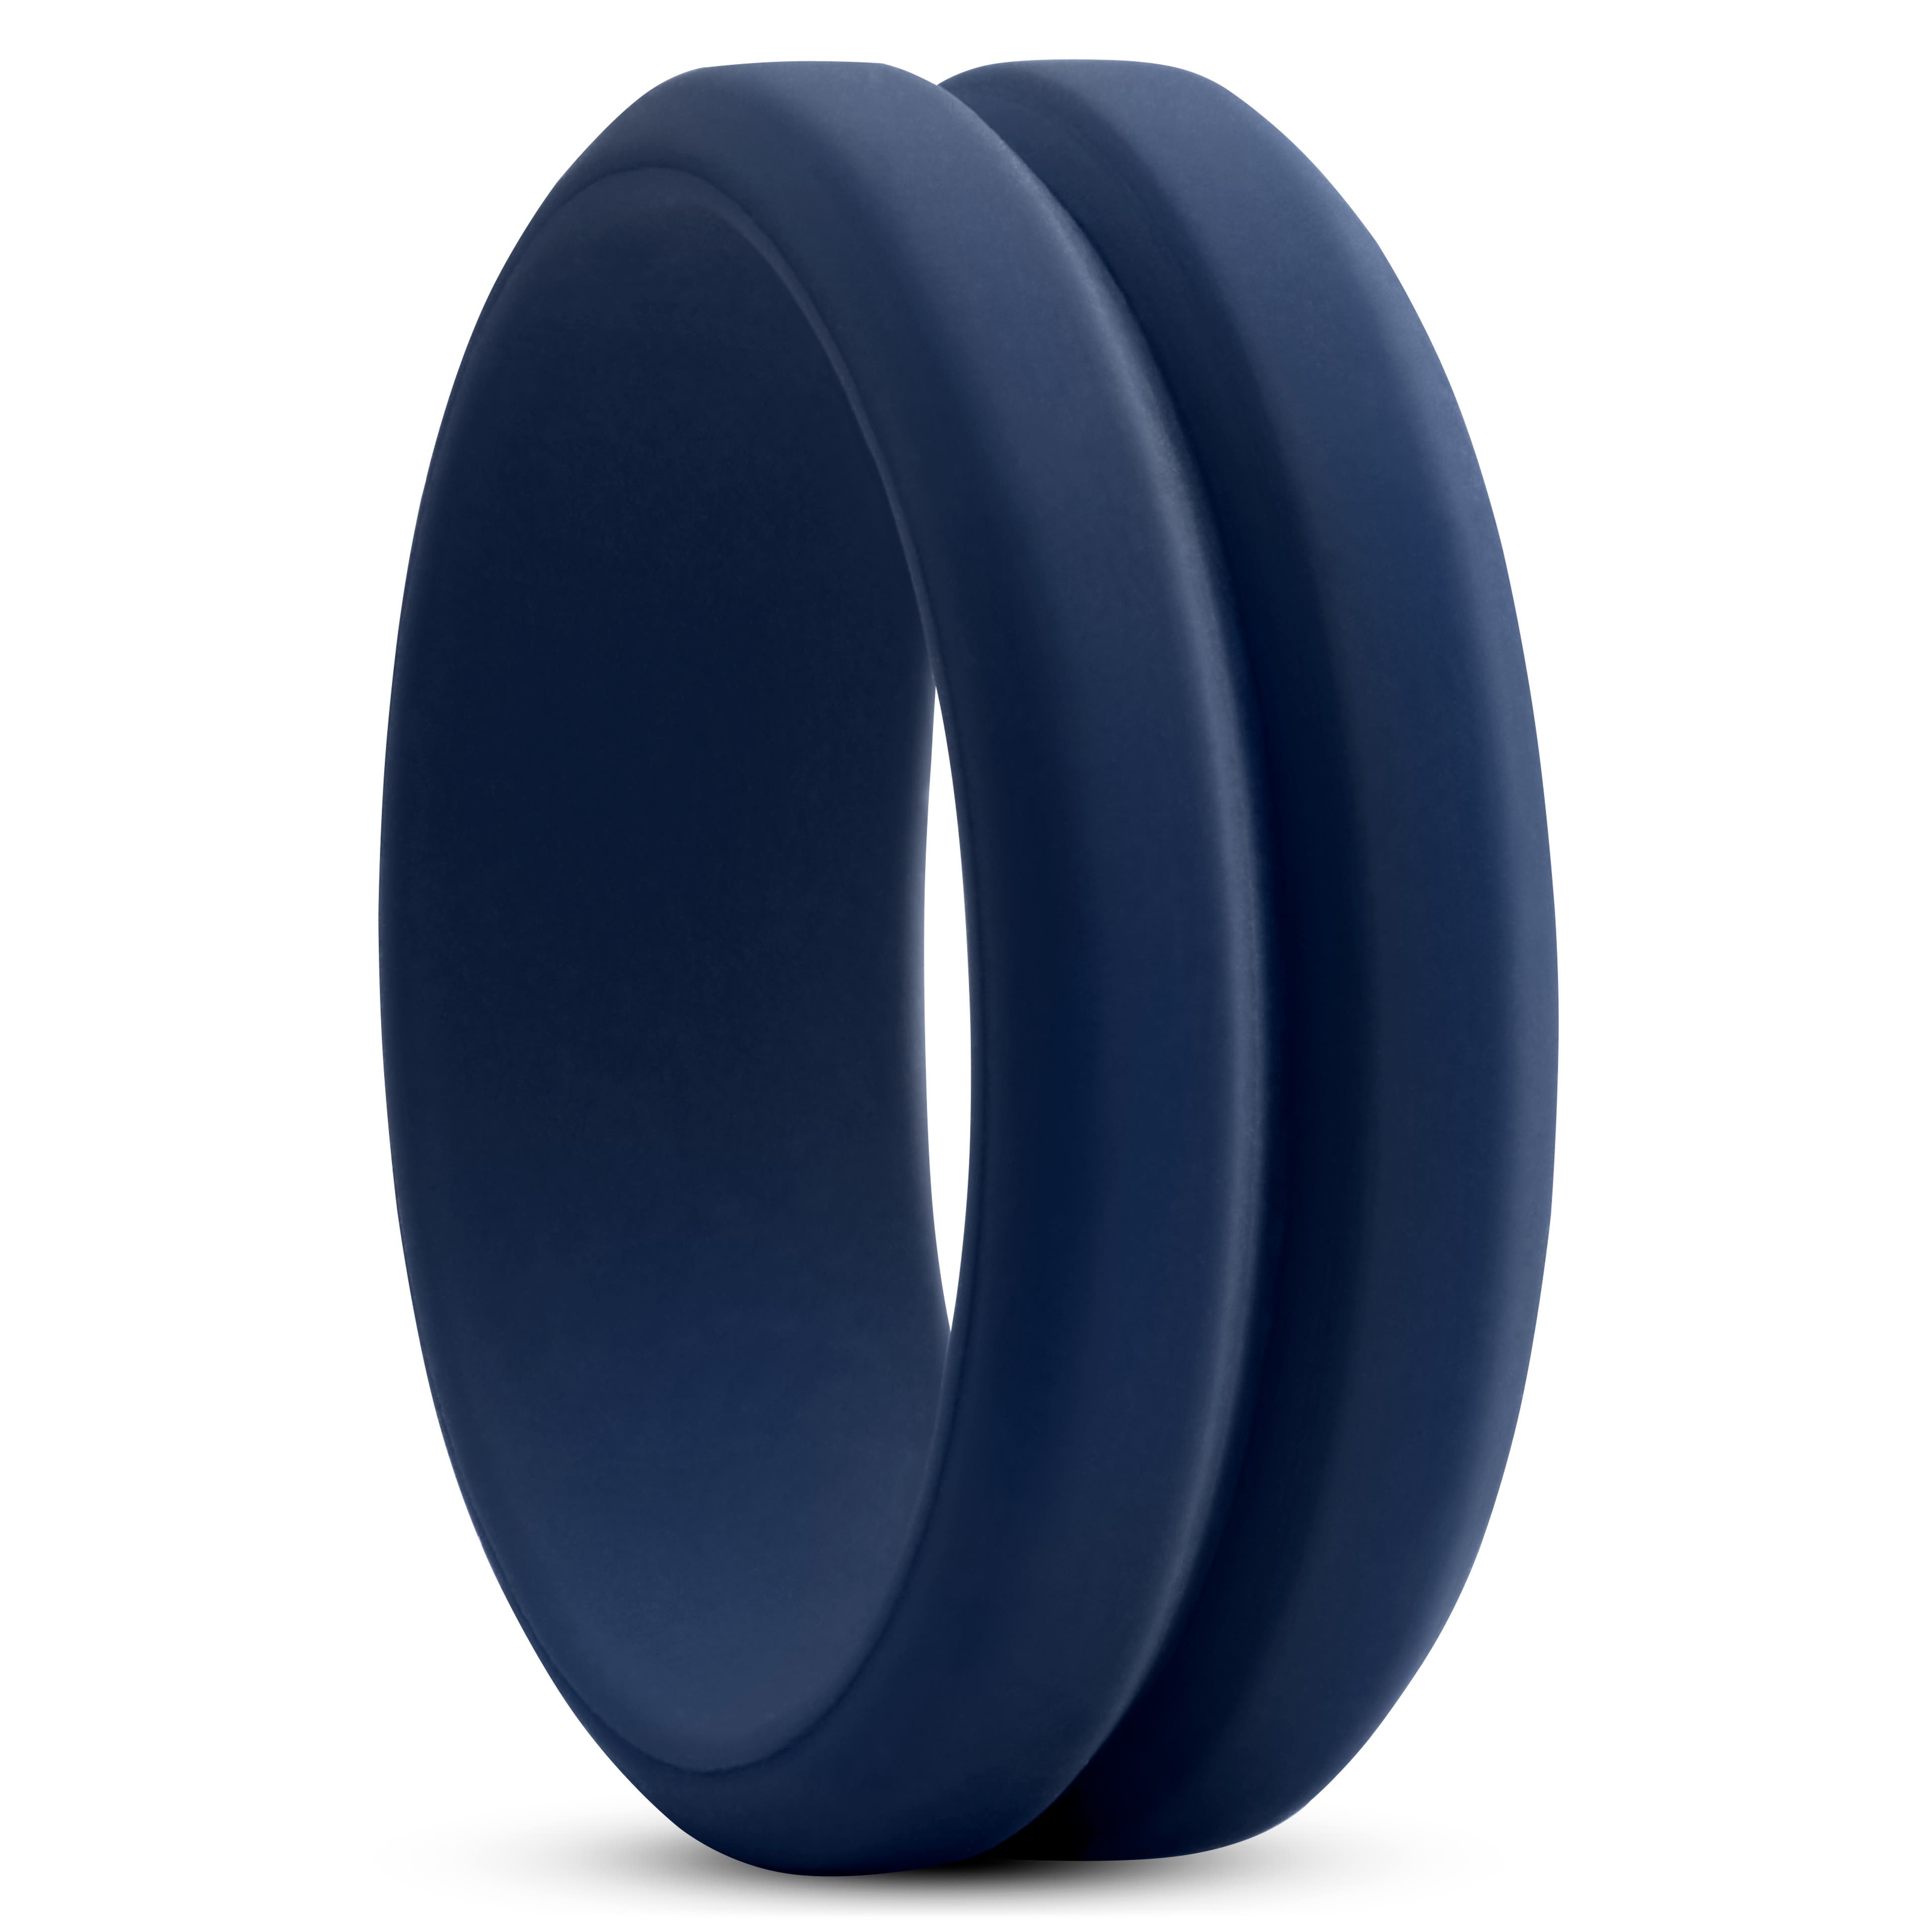 8 mm Navy Blue Silicone With Dent Middle Ring